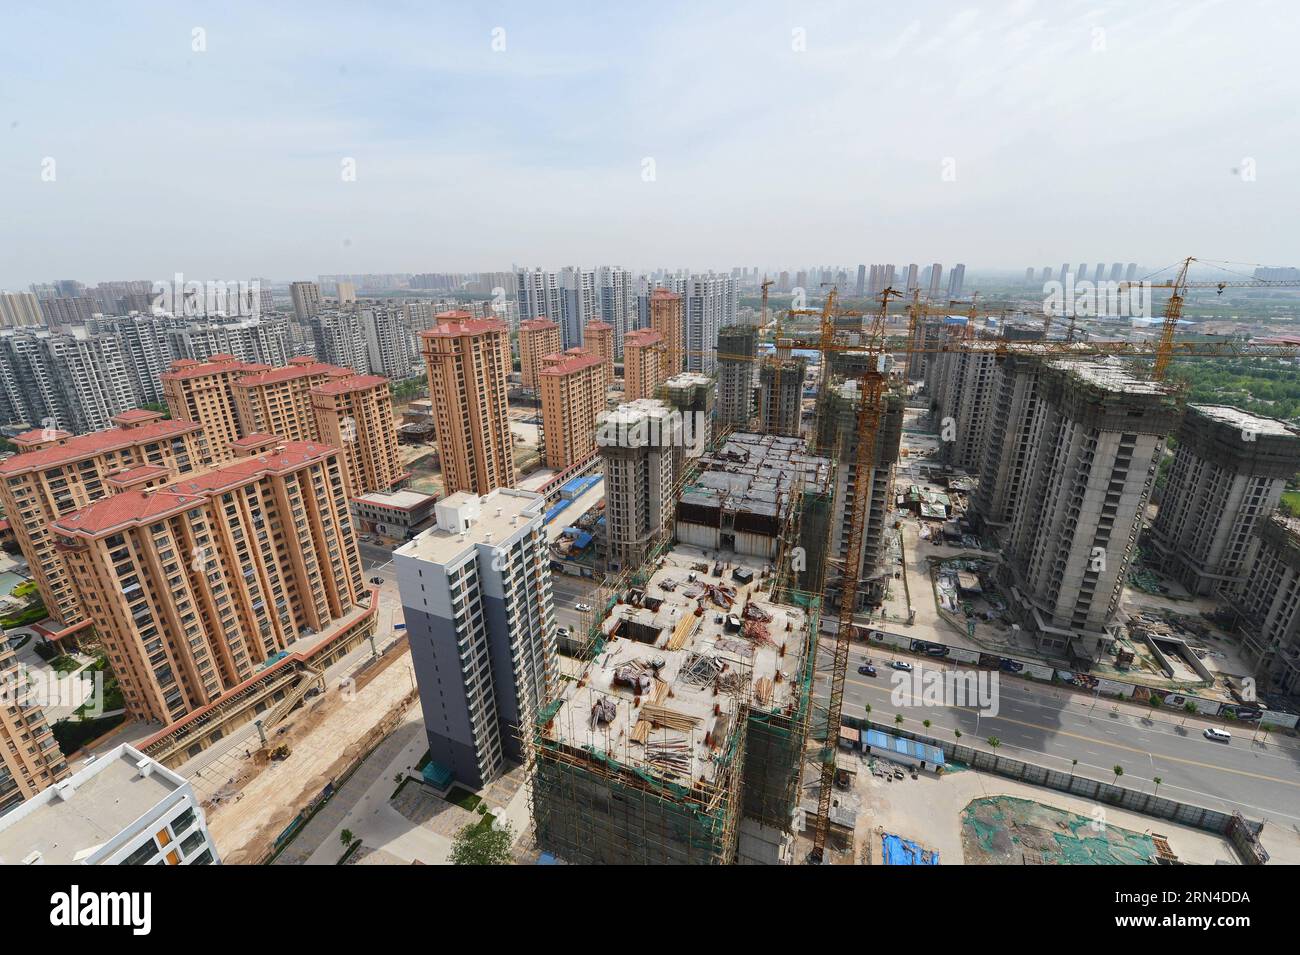 Photo taken on May 16, 2015 shows commercial residential buildings under construction in the Yuhua District of Shijiazhuang, capital of north China s Hebei Province. China s real estate market remained anemic with new home prices in April registering month-on-month declines in 48 of the 70 surveyed cities. ) (wf) CHINA-APRIL-REAL ESTATE MARKET (CN) ZhuxXudong PUBLICATIONxNOTxINxCHN   Photo Taken ON May 16 2015 Shows Commercial Residential Buildings Under Construction in The Yuhua District of Shijiazhuang Capital of North China S Hebei Province China S Real Estate Market remained anemic With Ne Stock Photo